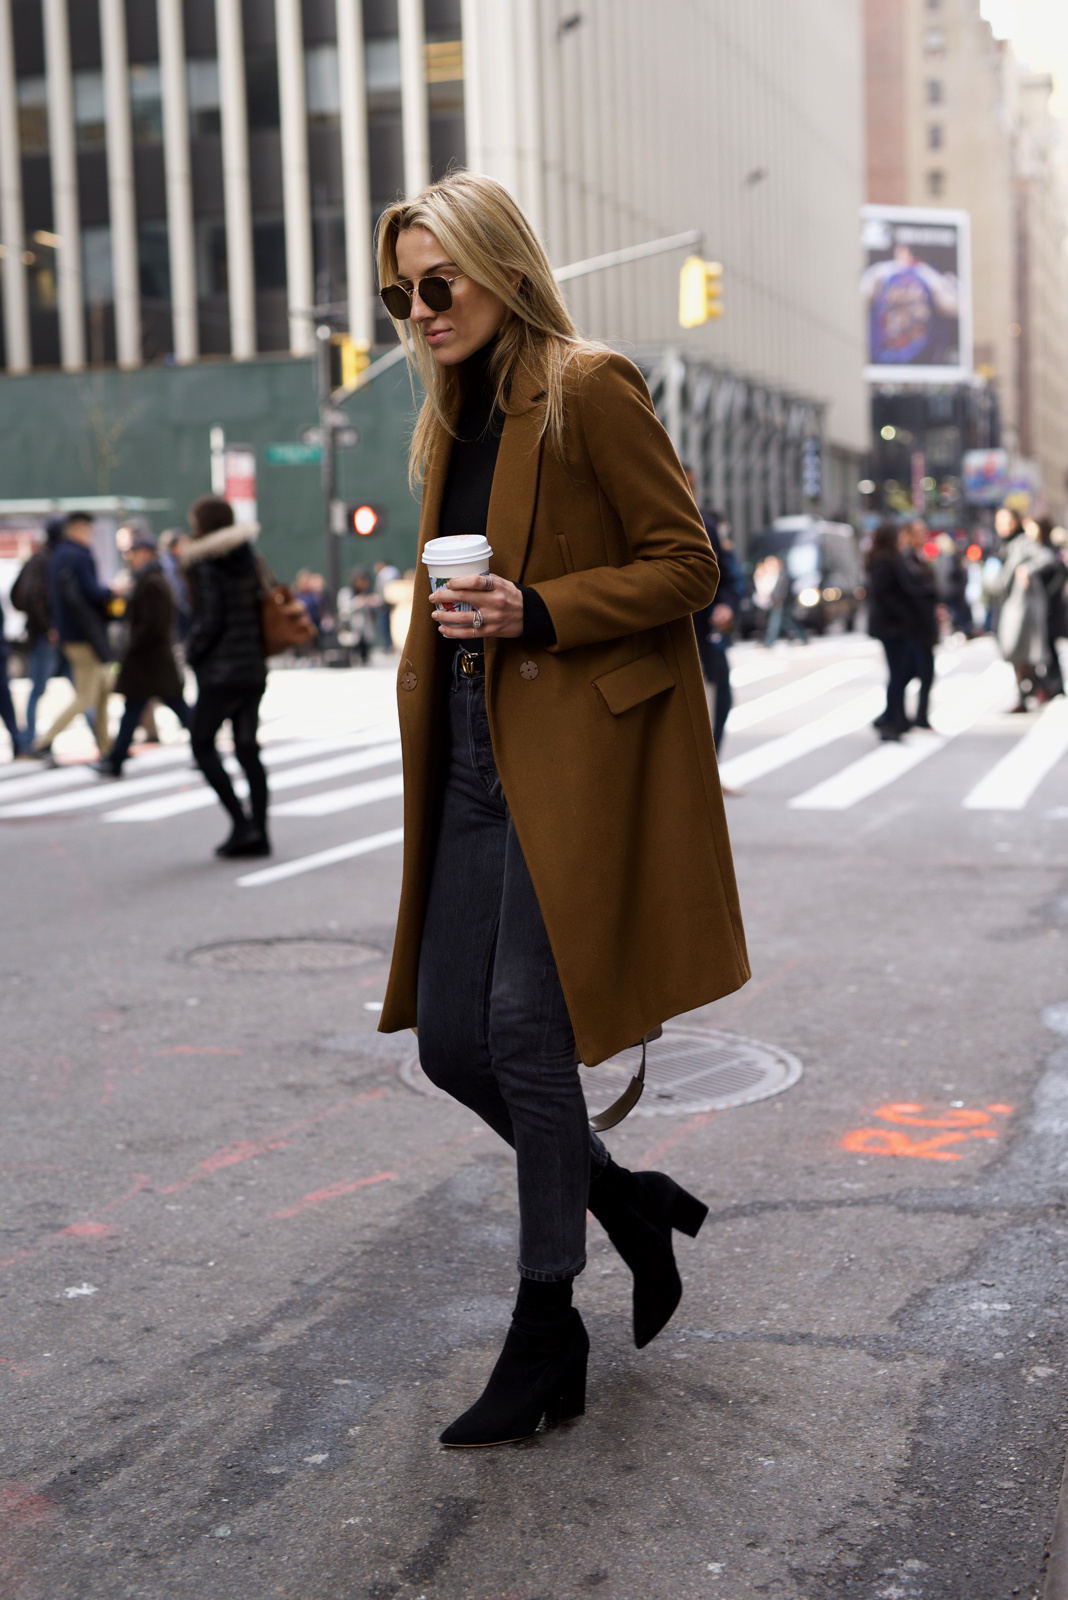 NYC Street Style in All Black with a Camel Coat - Lisa D CahueLisa D Cahue